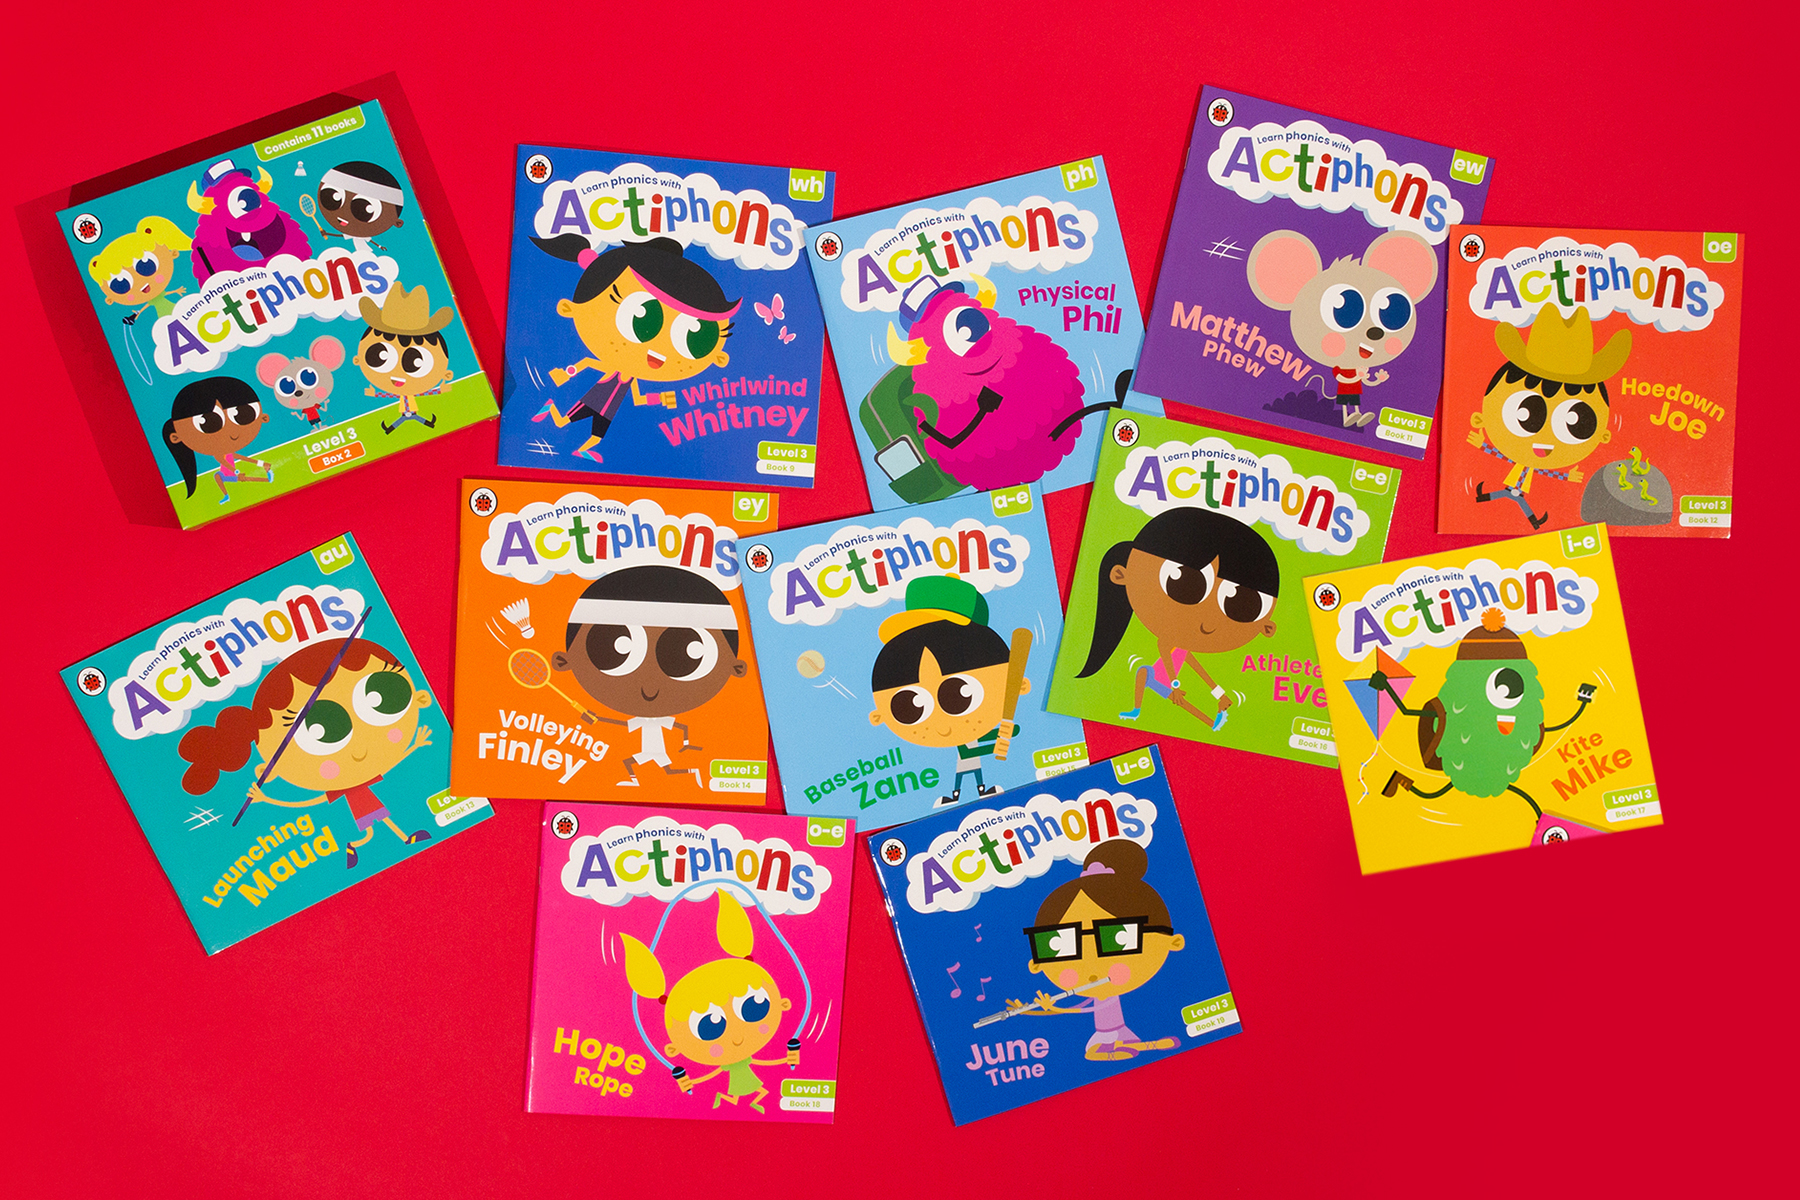 A photo of 12 books from the Actiphons series, all different reading levels, spread out on a bright red background